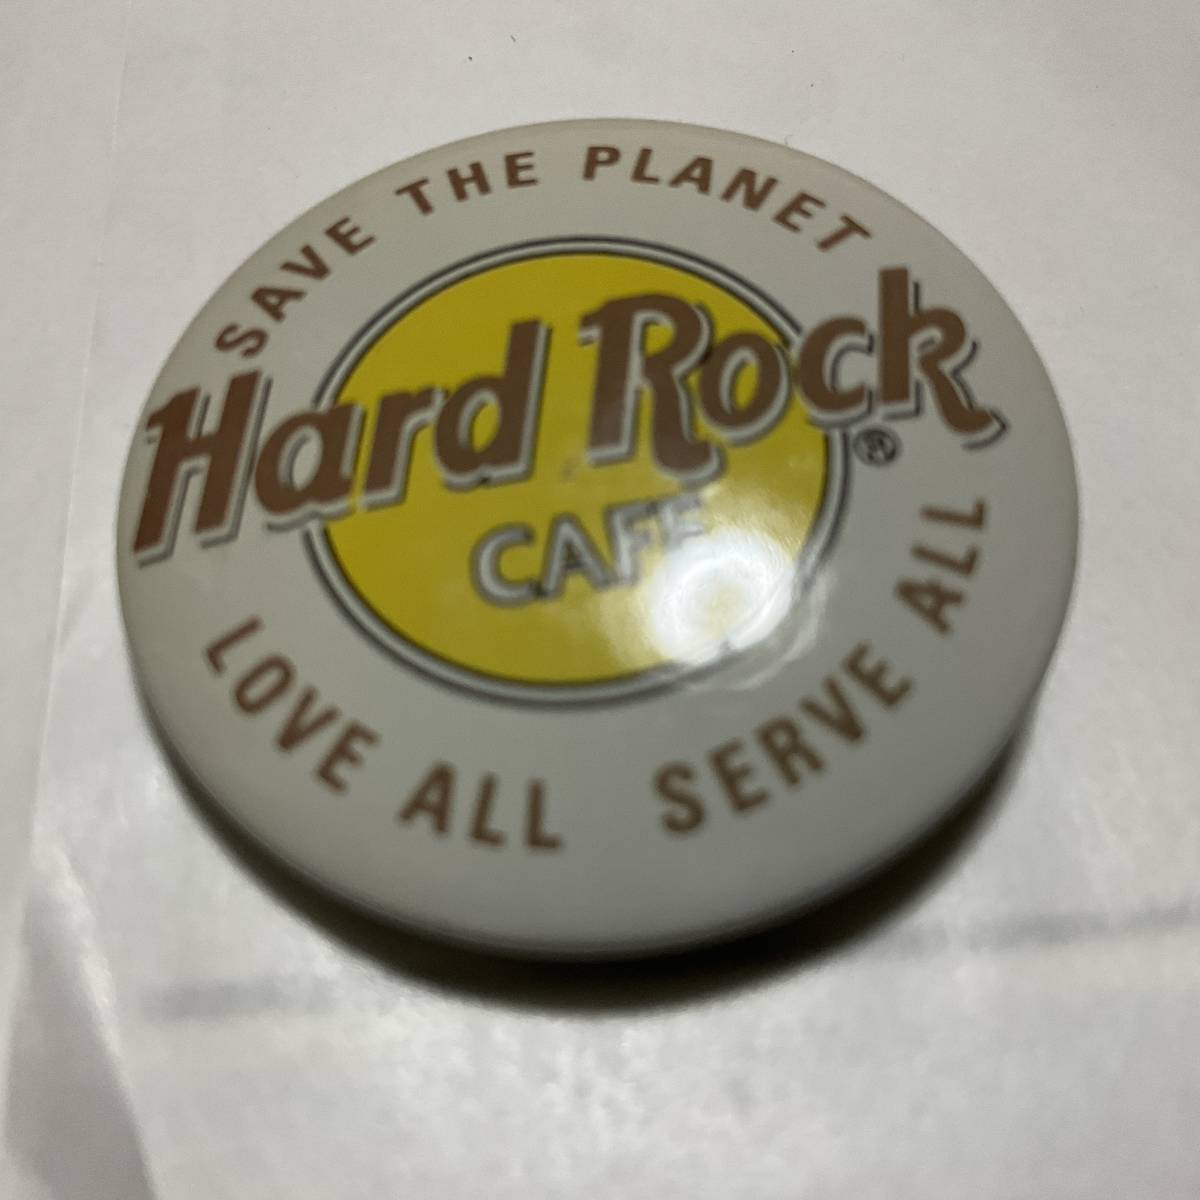 Hard Rock CAFE ハードロックカフェ 缶バッジ 缶バッチ②_画像1